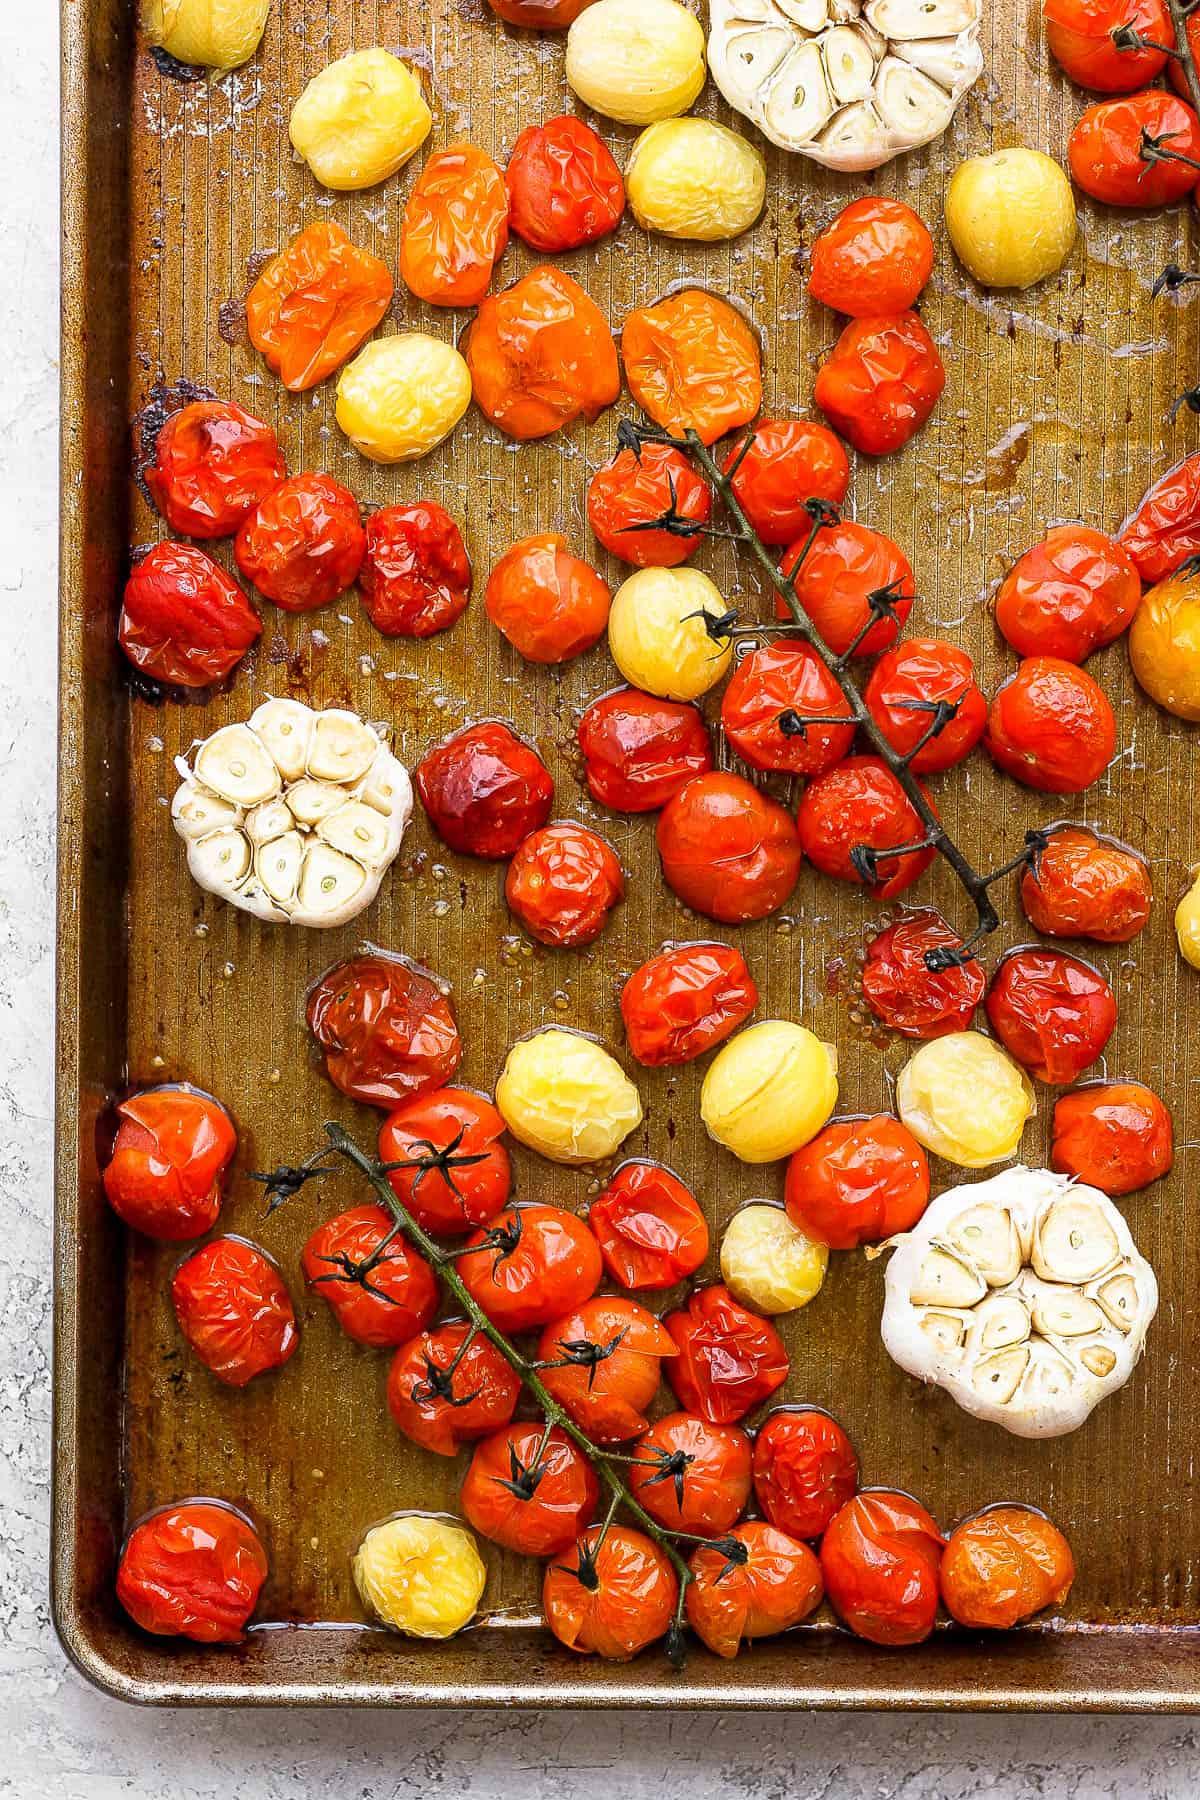 Oven roasted cherry tomatoes on a baking sheet.